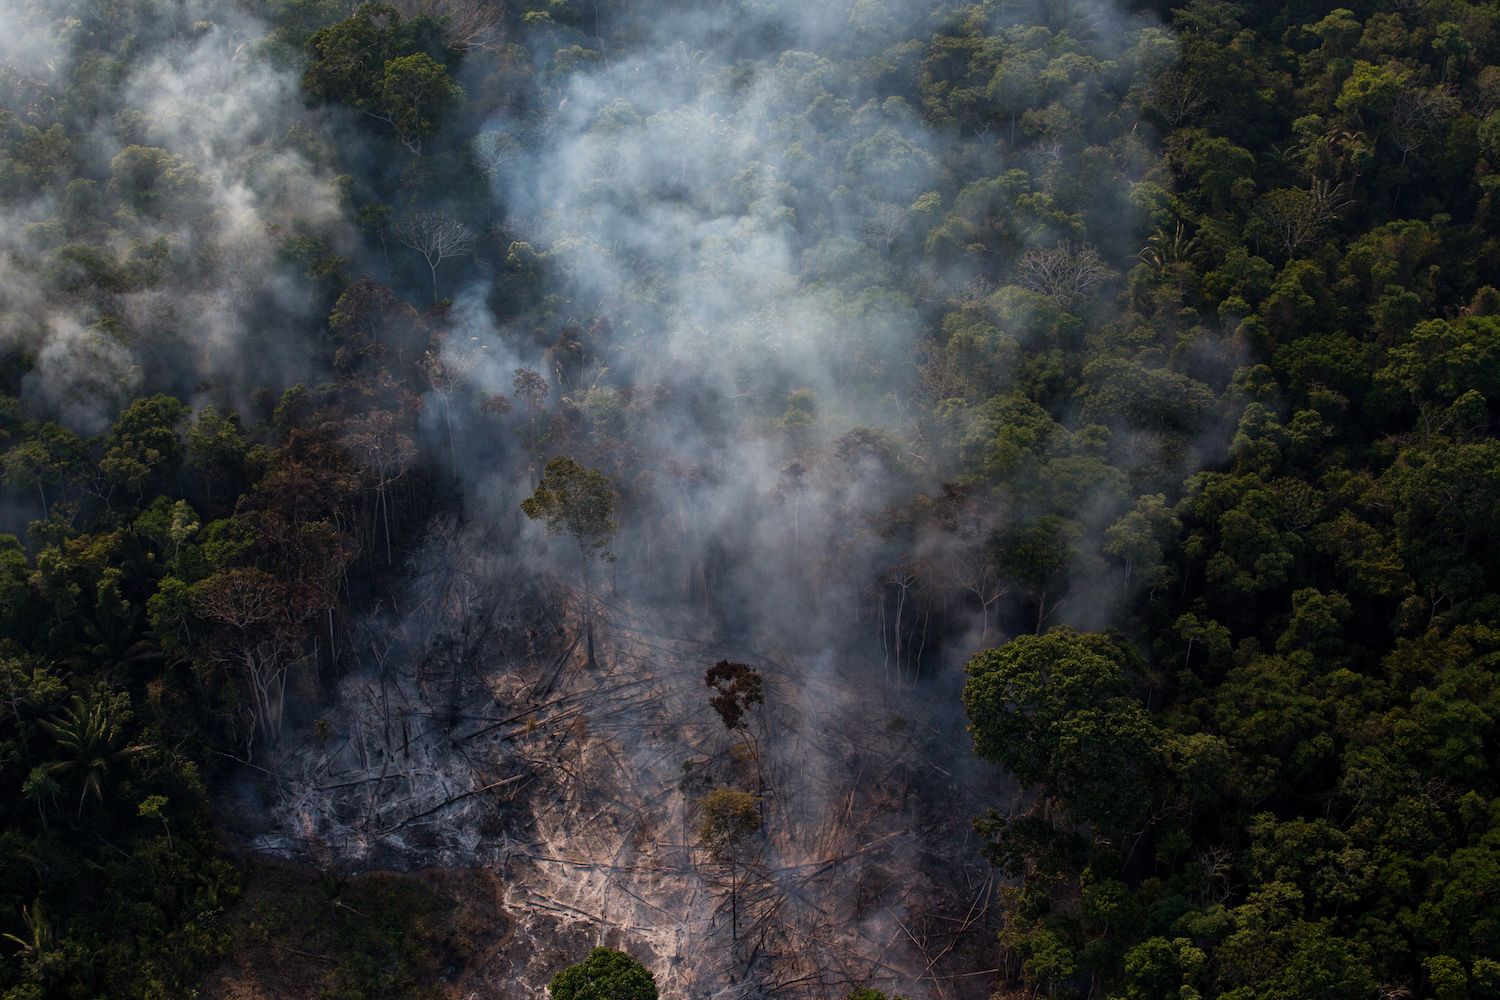 In the Amazon, uncontrolled forest fires advance around 200 to 300 meters (660 to 980 feet) a day, burning dry leaves and fallen timber up to 30 centimeters (1 foot) deep. Image by Flavio Forner. Brazil, undated.